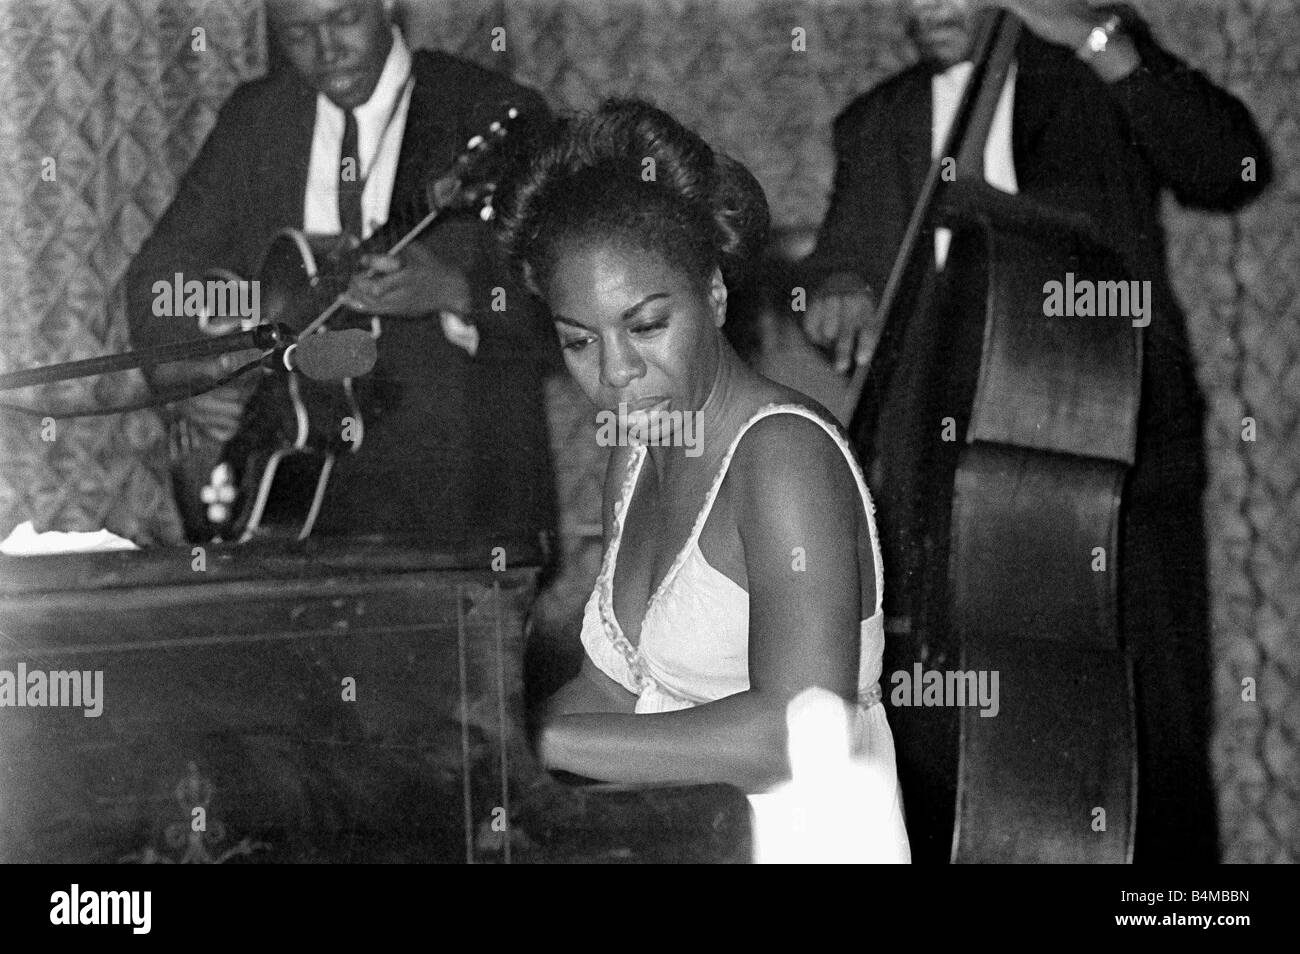 Nina Simone June 1965 Jazz singer Pictured preforming at Annies Club on stage playing piano Eunice Kathleen Waymon Nina Simone singer and songwriter Stock Photo